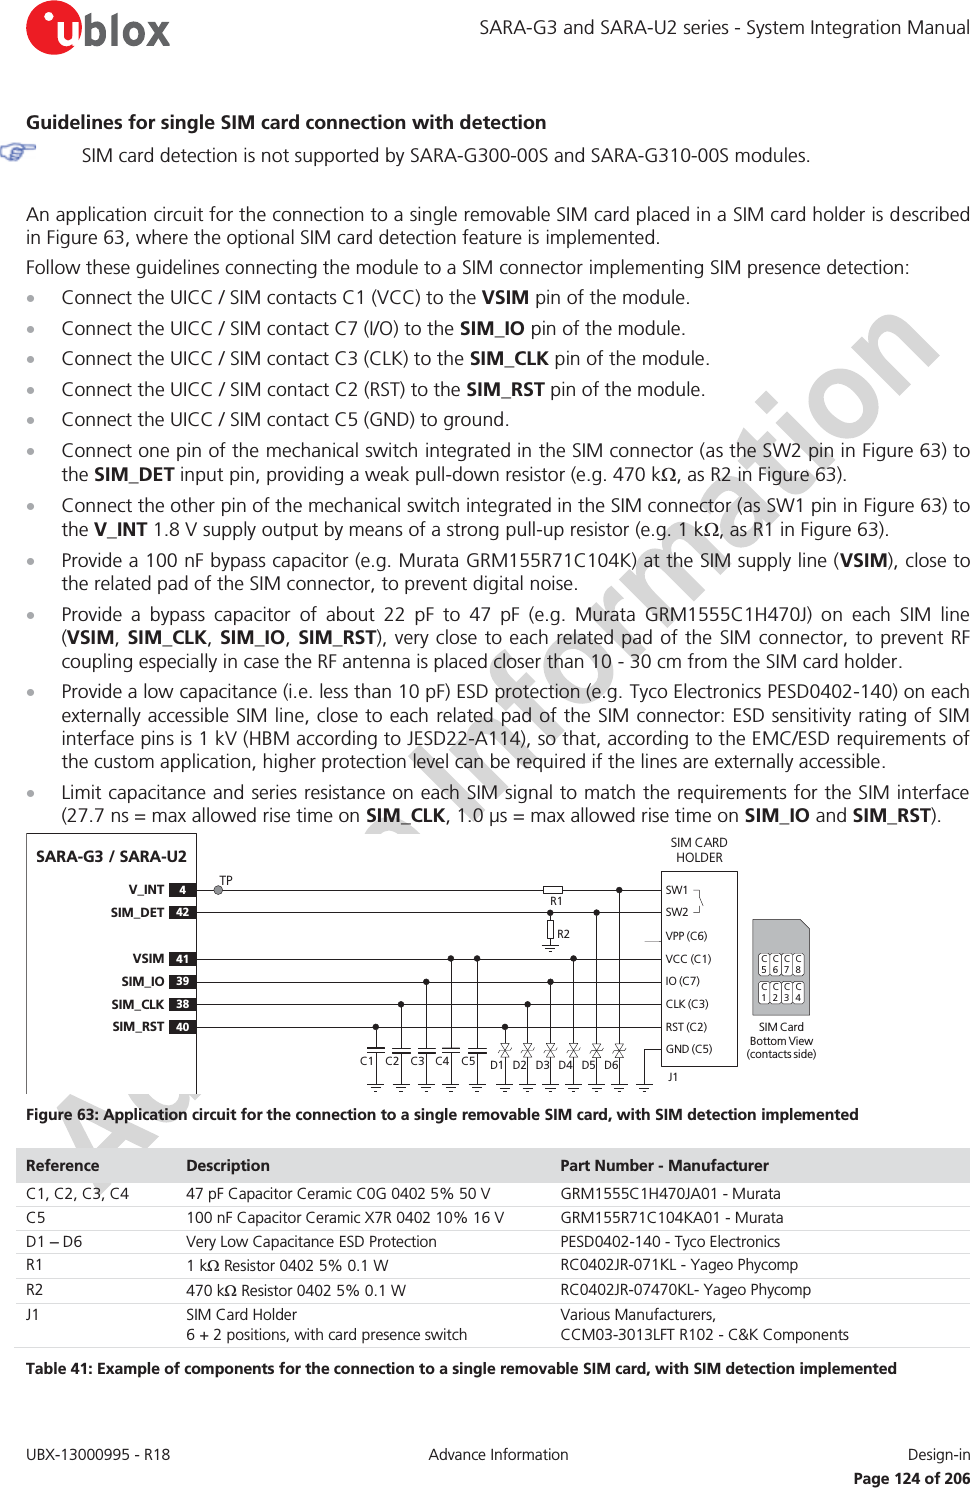 SARA-G3 and SARA-U2 series - System Integration Manual UBX-13000995 - R18  Advance Information  Design-in   Page 124 of 206 Guidelines for single SIM card connection with detection  SIM card detection is not supported by SARA-G300-00S and SARA-G310-00S modules.  An application circuit for the connection to a single removable SIM card placed in a SIM card holder is described in Figure 63, where the optional SIM card detection feature is implemented. Follow these guidelines connecting the module to a SIM connector implementing SIM presence detection: x Connect the UICC / SIM contacts C1 (VCC) to the VSIM pin of the module. x Connect the UICC / SIM contact C7 (I/O) to the SIM_IO pin of the module. x Connect the UICC / SIM contact C3 (CLK) to the SIM_CLK pin of the module. x Connect the UICC / SIM contact C2 (RST) to the SIM_RST pin of the module. x Connect the UICC / SIM contact C5 (GND) to ground. x Connect one pin of the mechanical switch integrated in the SIM connector (as the SW2 pin in Figure 63) to the SIM_DET input pin, providing a weak pull-down resistor (e.g. 470 k:, as R2 in Figure 63). x Connect the other pin of the mechanical switch integrated in the SIM connector (as SW1 pin in Figure 63) to the V_INT 1.8 V supply output by means of a strong pull-up resistor (e.g. 1 k:, as R1 in Figure 63). x Provide a 100 nF bypass capacitor (e.g. Murata GRM155R71C104K) at the SIM supply line (VSIM), close to the related pad of the SIM connector, to prevent digital noise.  x Provide a bypass capacitor of about 22 pF to 47 pF (e.g. Murata GRM1555C1H470J) on each SIM line (VSIM, SIM_CLK, SIM_IO,  SIM_RST), very close to each related pad of the SIM connector, to prevent RF coupling especially in case the RF antenna is placed closer than 10 - 30 cm from the SIM card holder. x Provide a low capacitance (i.e. less than 10 pF) ESD protection (e.g. Tyco Electronics PESD0402-140) on each externally accessible SIM line, close to each related pad of the SIM connector: ESD sensitivity rating of SIM interface pins is 1 kV (HBM according to JESD22-A114), so that, according to the EMC/ESD requirements of the custom application, higher protection level can be required if the lines are externally accessible.  x Limit capacitance and series resistance on each SIM signal to match the requirements for the SIM interface (27.7 ns = max allowed rise time on SIM_CLK, 1.0 μs = max allowed rise time on SIM_IO and SIM_RST). SARA-G3 / SARA-U241VSIM39SIM_IO38SIM_CLK40SIM_RST4V_INT42SIM_DETSIM CARD HOLDERC5C6C7C1C2C3SIM Card Bottom View (contacts side)C1VPP (C6)VCC (C1)IO (C7)CLK (C3)RST (C2)GND (C5)C2 C3 C5J1C4SW1SW2D1 D2 D3 D4 D5 D6R2R1C8C4TP Figure 63: Application circuit for the connection to a single removable SIM card, with SIM detection implemented Reference  Description  Part Number - Manufacturer C1, C2, C3, C4 47 pF Capacitor Ceramic C0G 0402 5% 50 V GRM1555C1H470JA01 - Murata C5 100 nF Capacitor Ceramic X7R 0402 10% 16 V GRM155R71C104KA01 - Murata D1 – D6 Very Low Capacitance ESD Protection PESD0402-140 - Tyco Electronics  R1 1 k: Resistor 0402 5% 0.1 W RC0402JR-071KL - Yageo Phycomp R2 470 k: Resistor 0402 5% 0.1 W RC0402JR-07470KL- Yageo Phycomp J1 SIM Card Holder 6 + 2 positions, with card presence switch Various Manufacturers, CCM03-3013LFT R102 - C&amp;K Components Table 41: Example of components for the connection to a single removable SIM card, with SIM detection implemented 